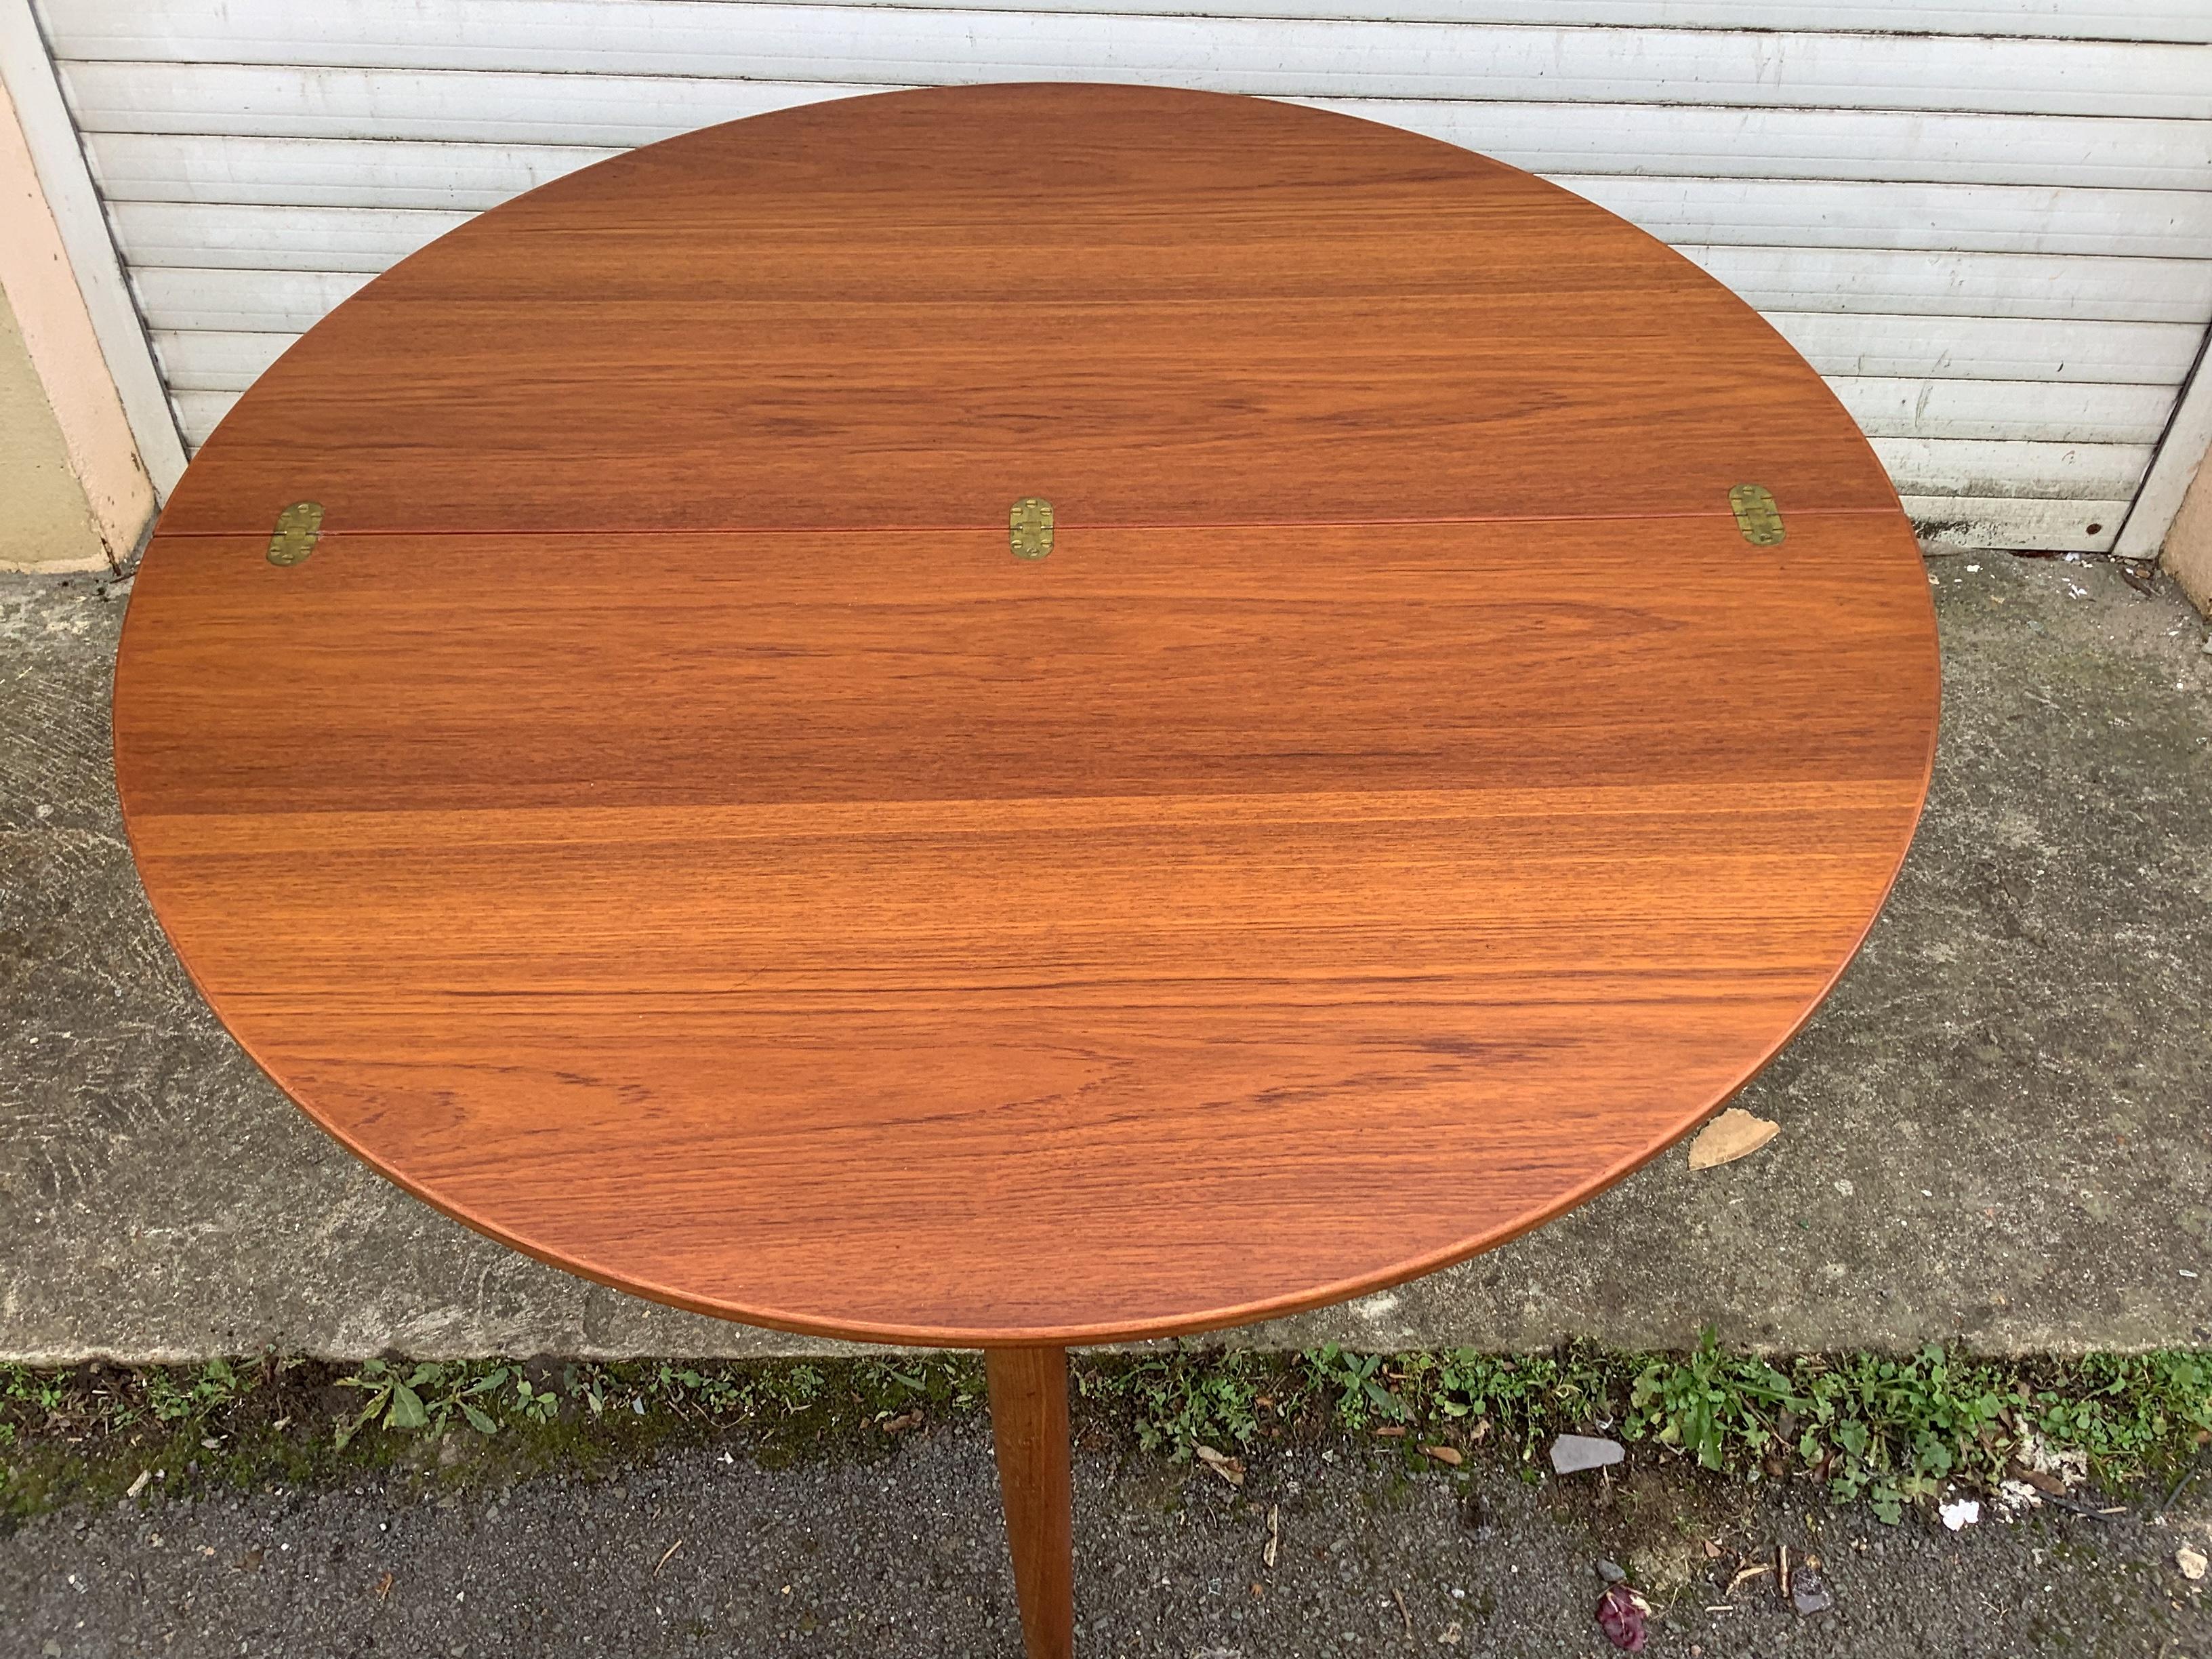 British Midcentury Danish Console & dinning Table in Teak by Poul Volther for Frem Røjle For Sale